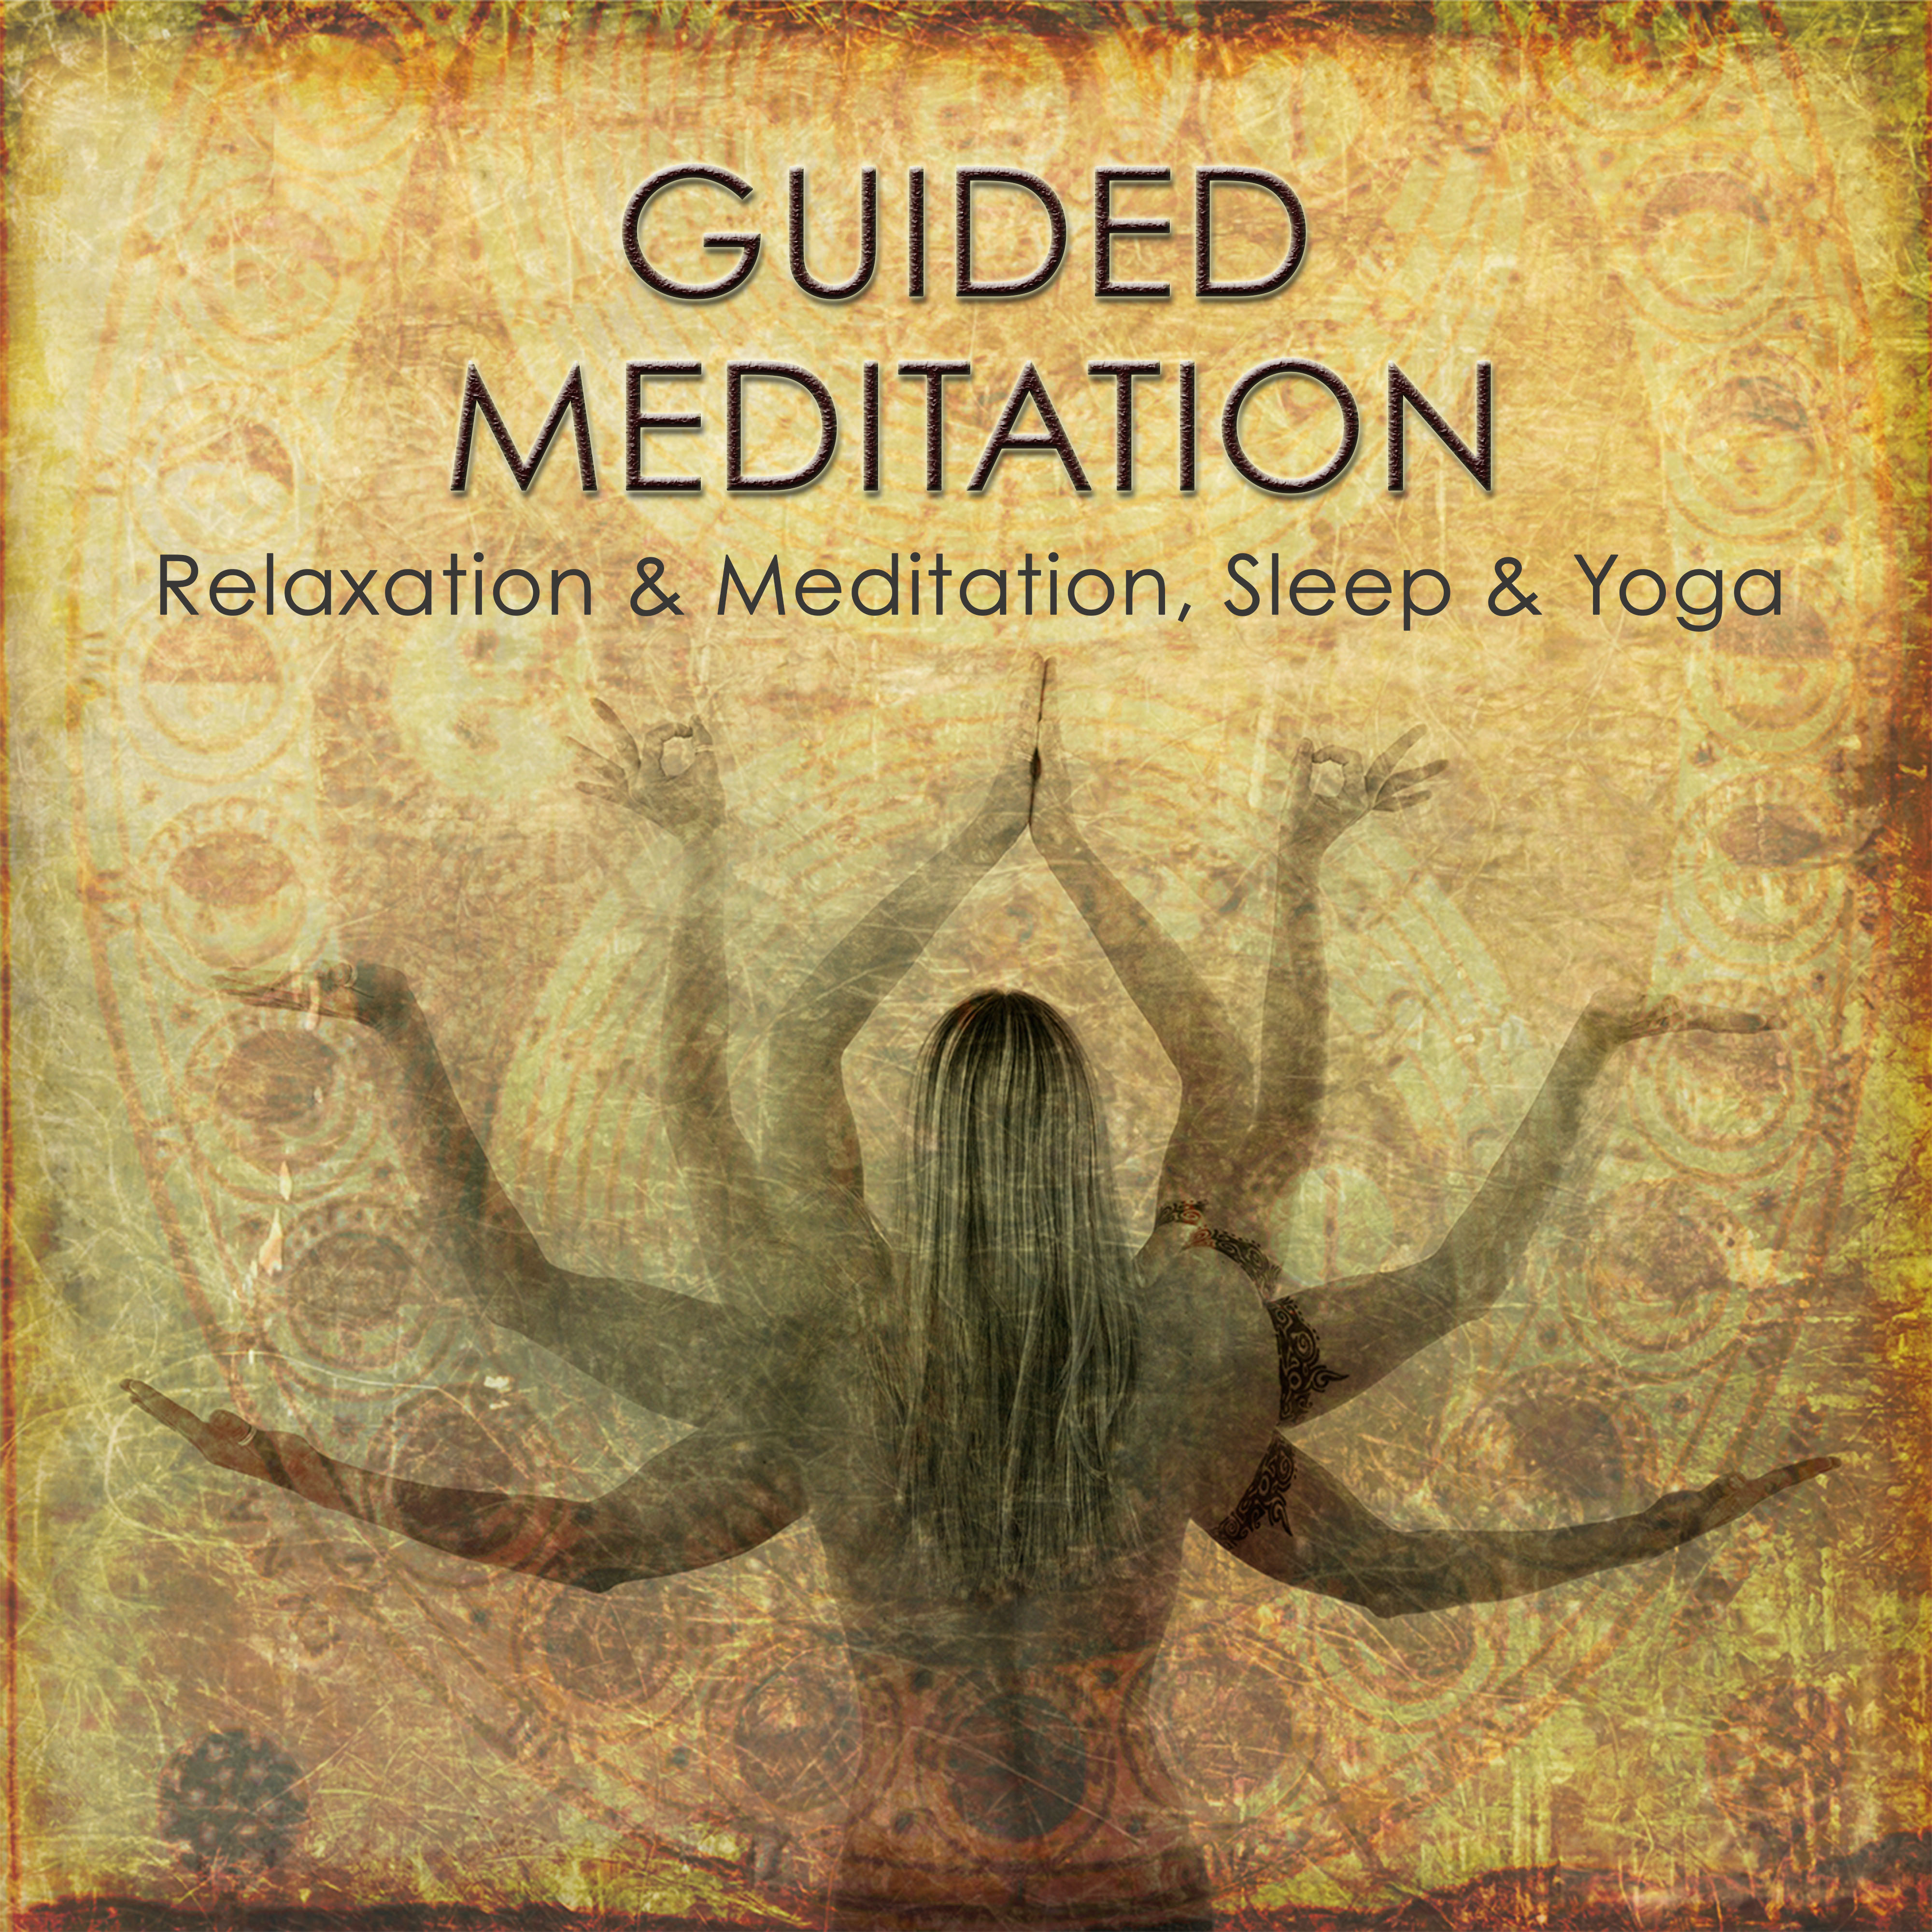 Guided Meditation & Healing Music for Sleeping and Dreaming